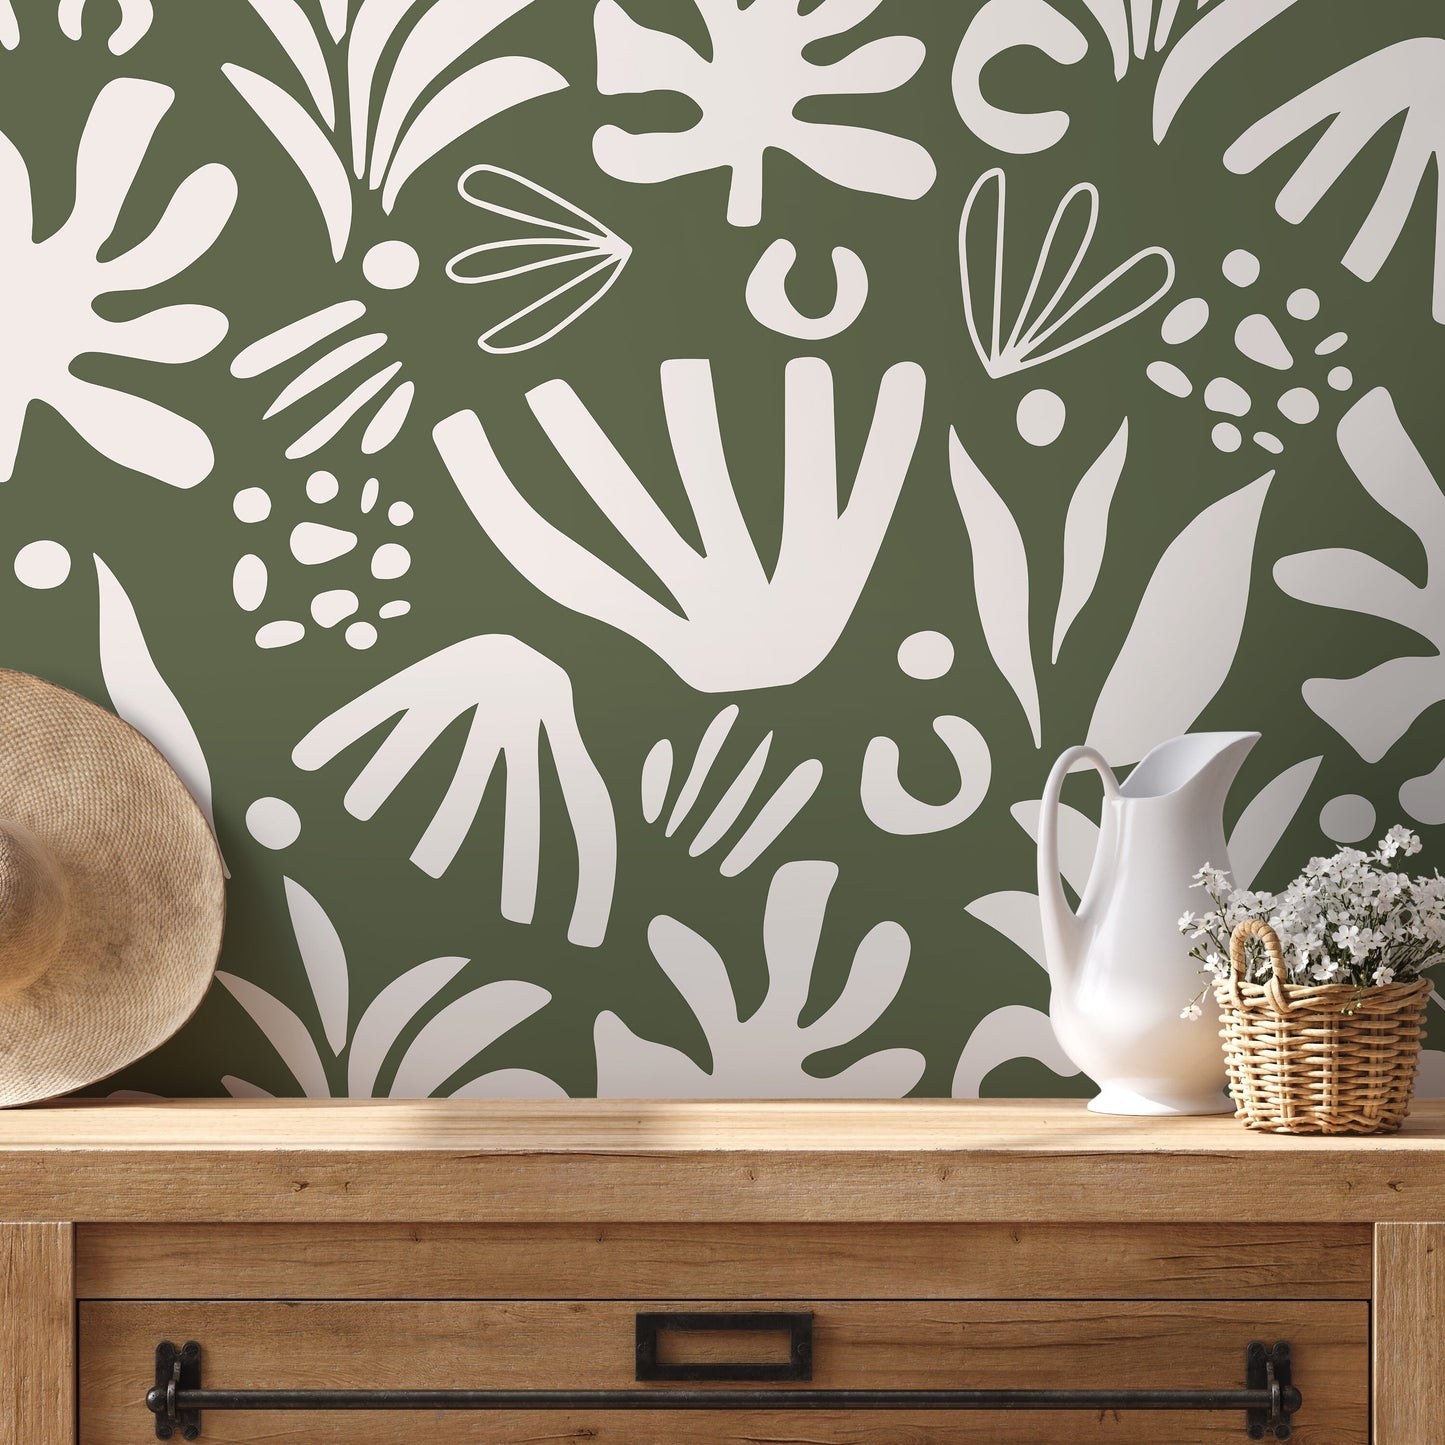 Green Abstract Garden Wallpaper Boho Wallpaper Peel and Stick and Traditional Wallpaper - D680